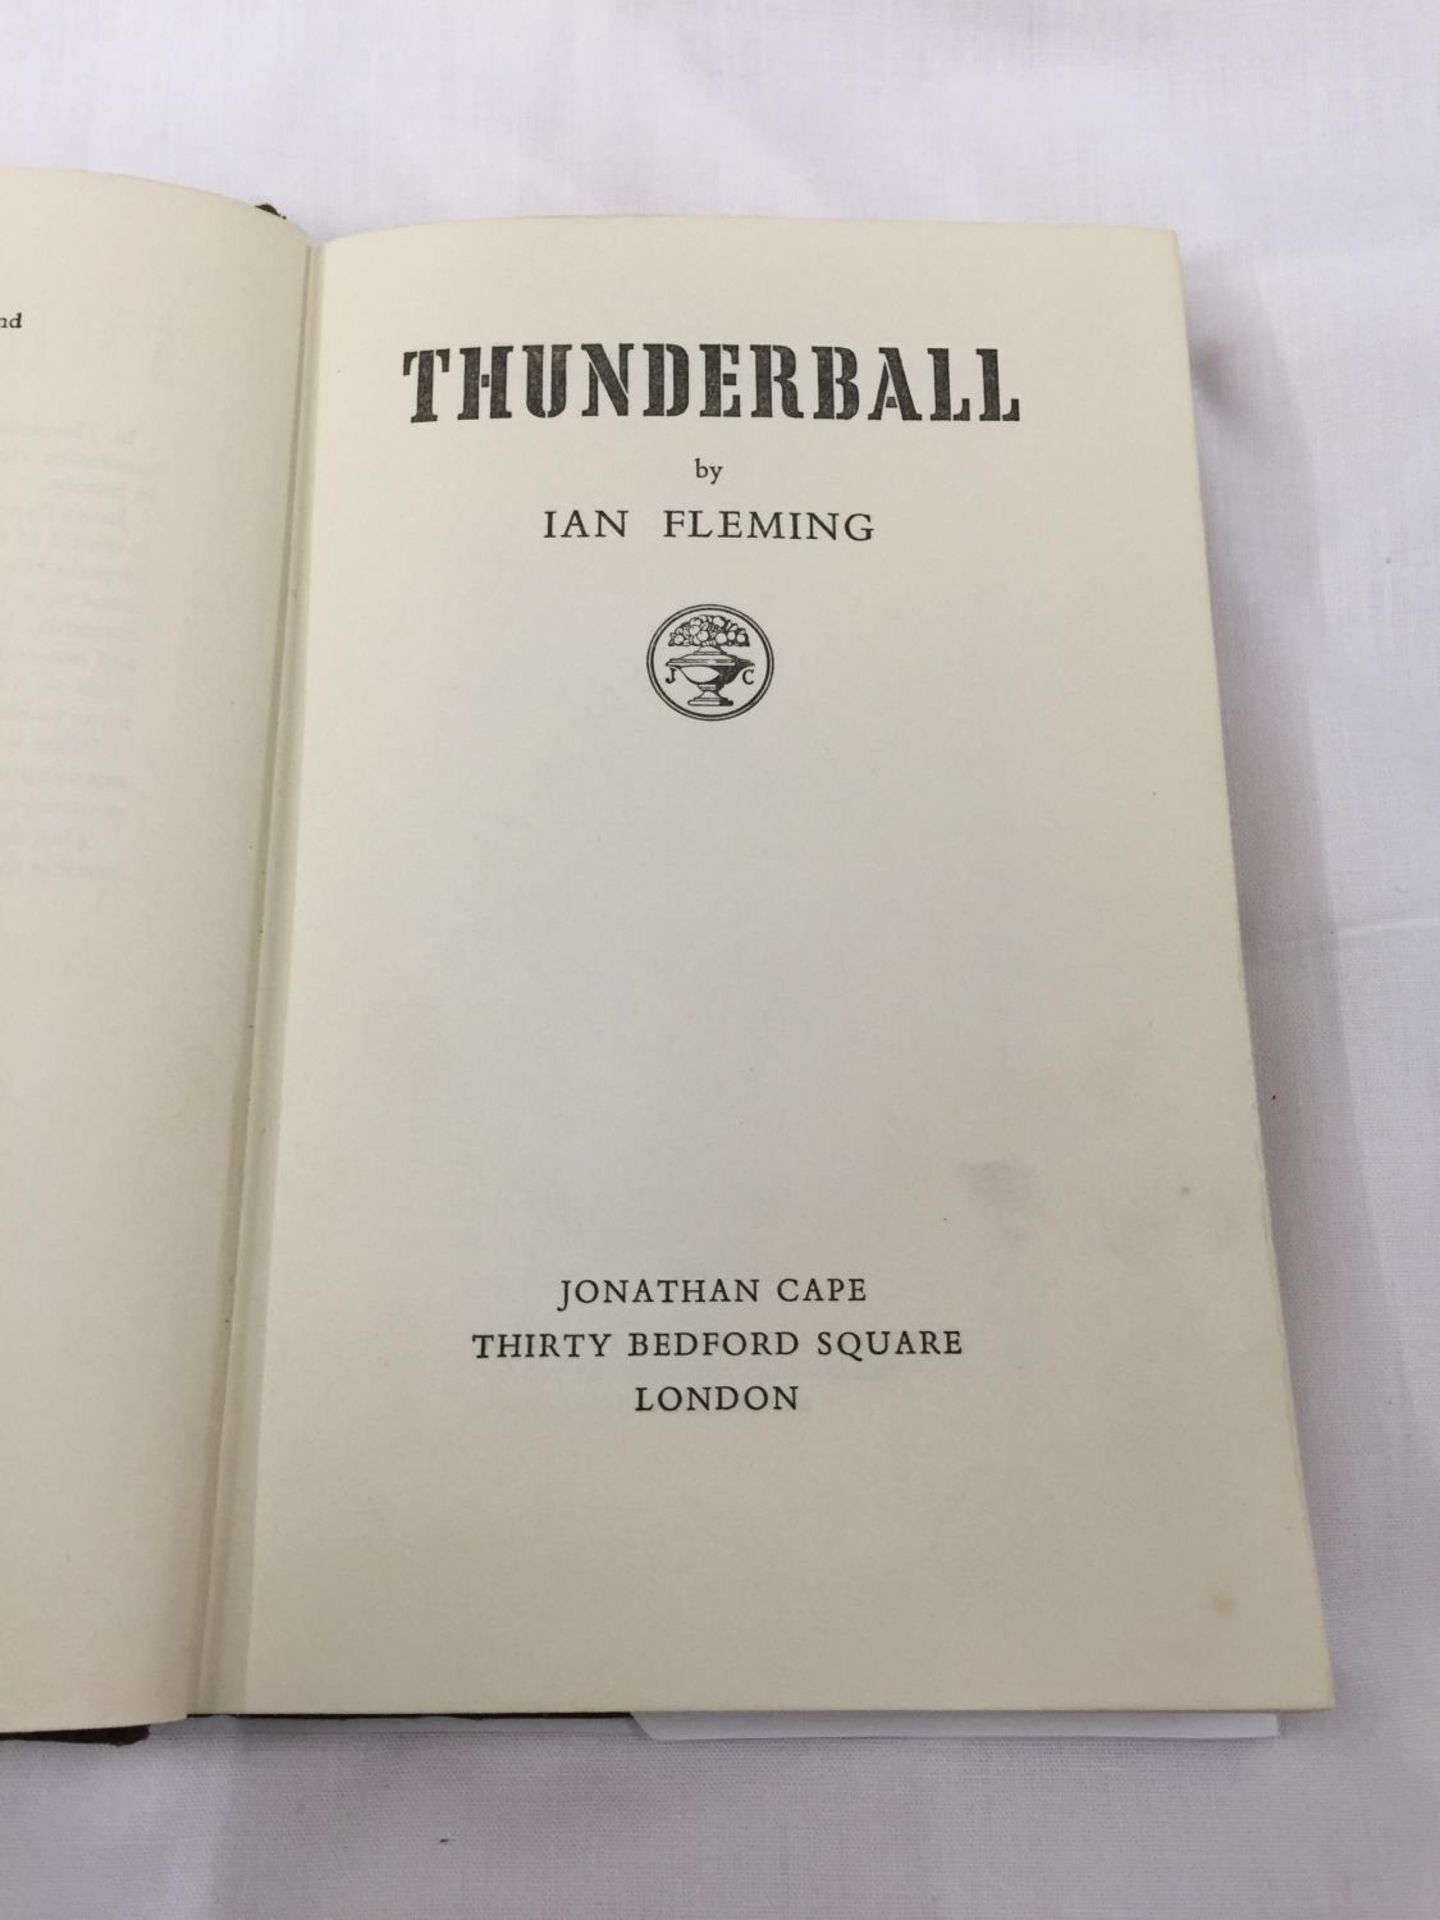 A FIRST EDITION JAMES BOND NOVEL - THUNDERBALL BY IAN FLEMING, HARDBACK WITH REPRINTED DUST JACKET - - Image 5 of 10